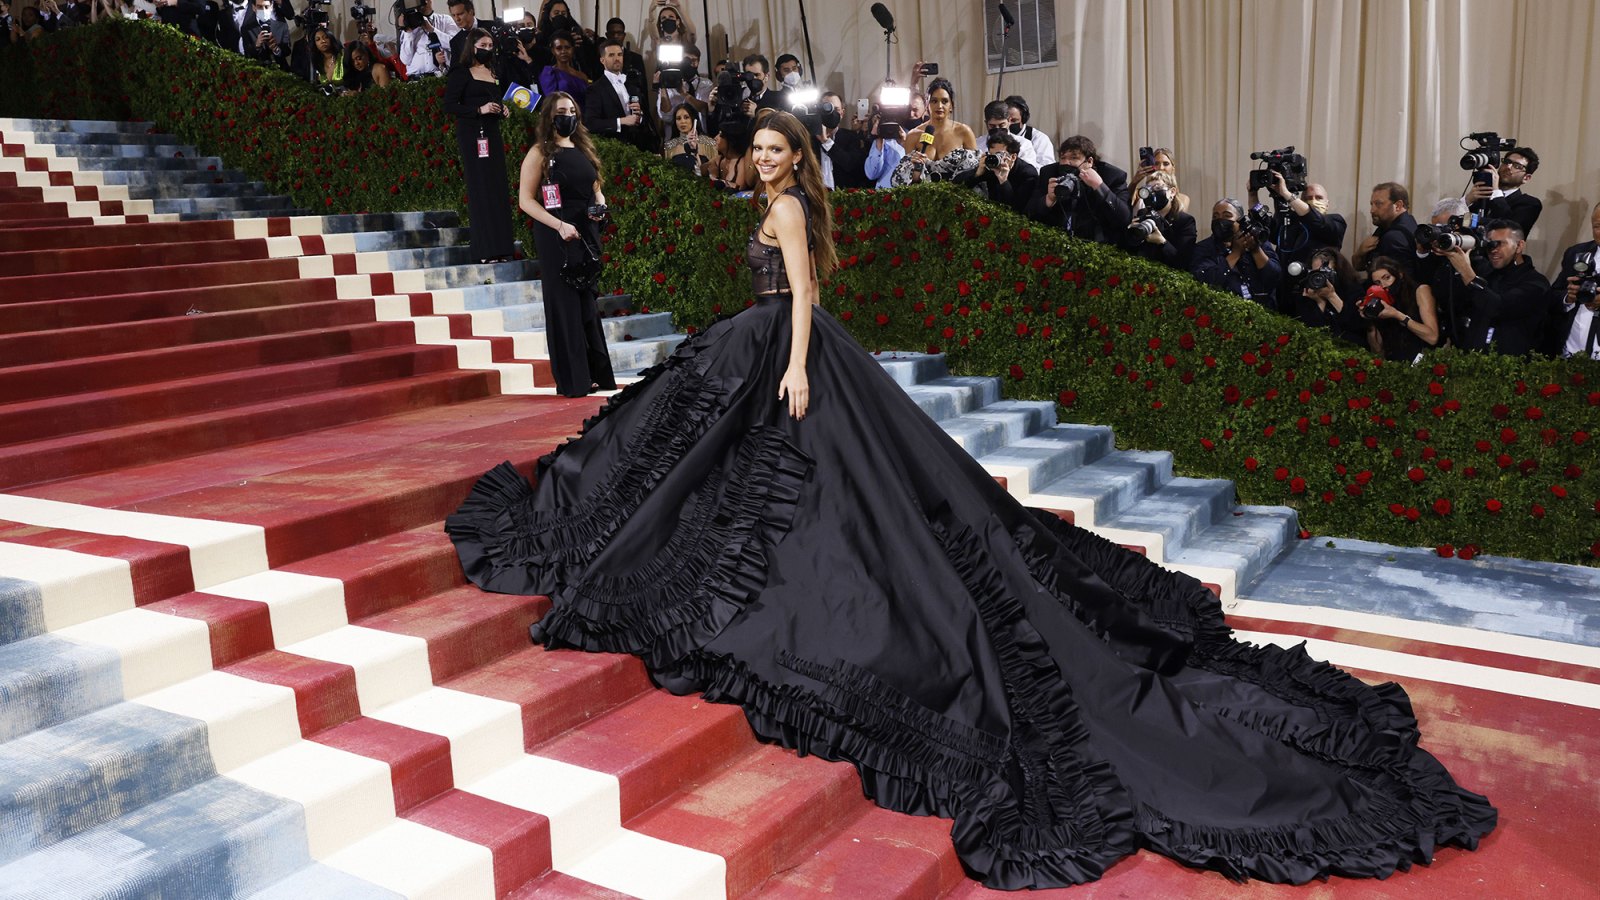 What Is the Met Gala? Your Burning Questions About Fashion's Biggest Night Answered